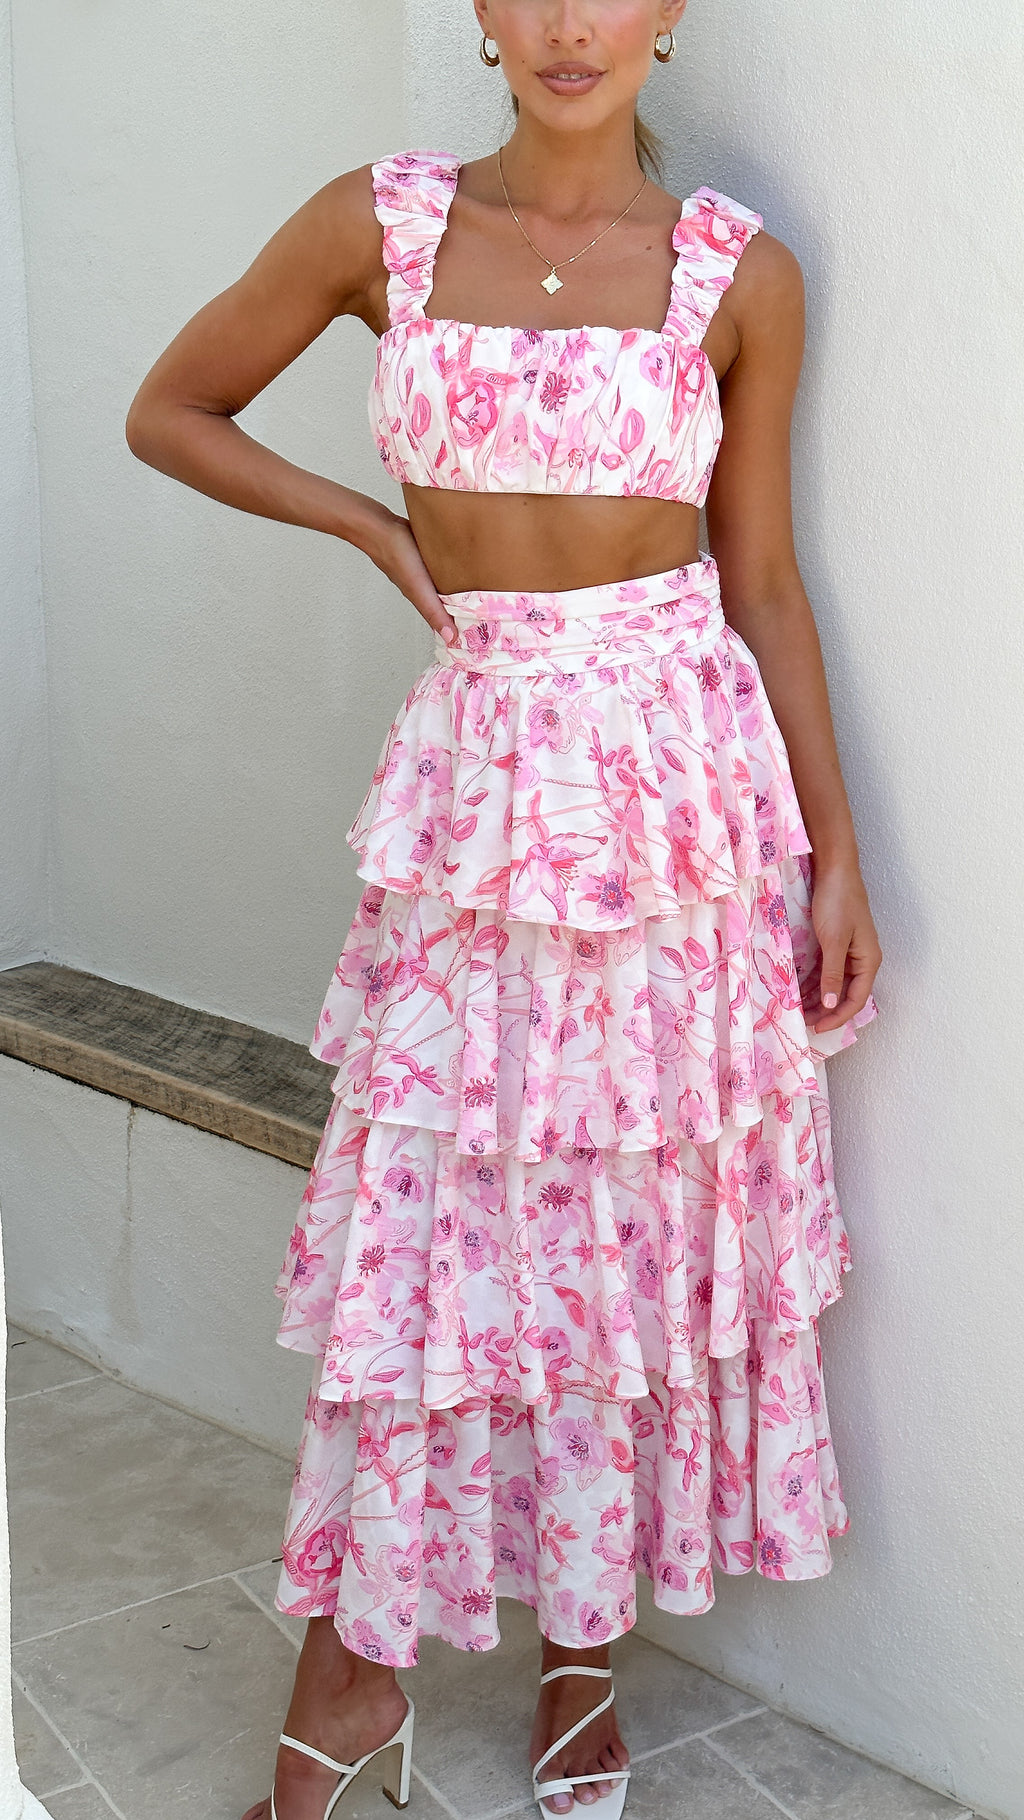 Kelly Top and Skirt Set - Pink